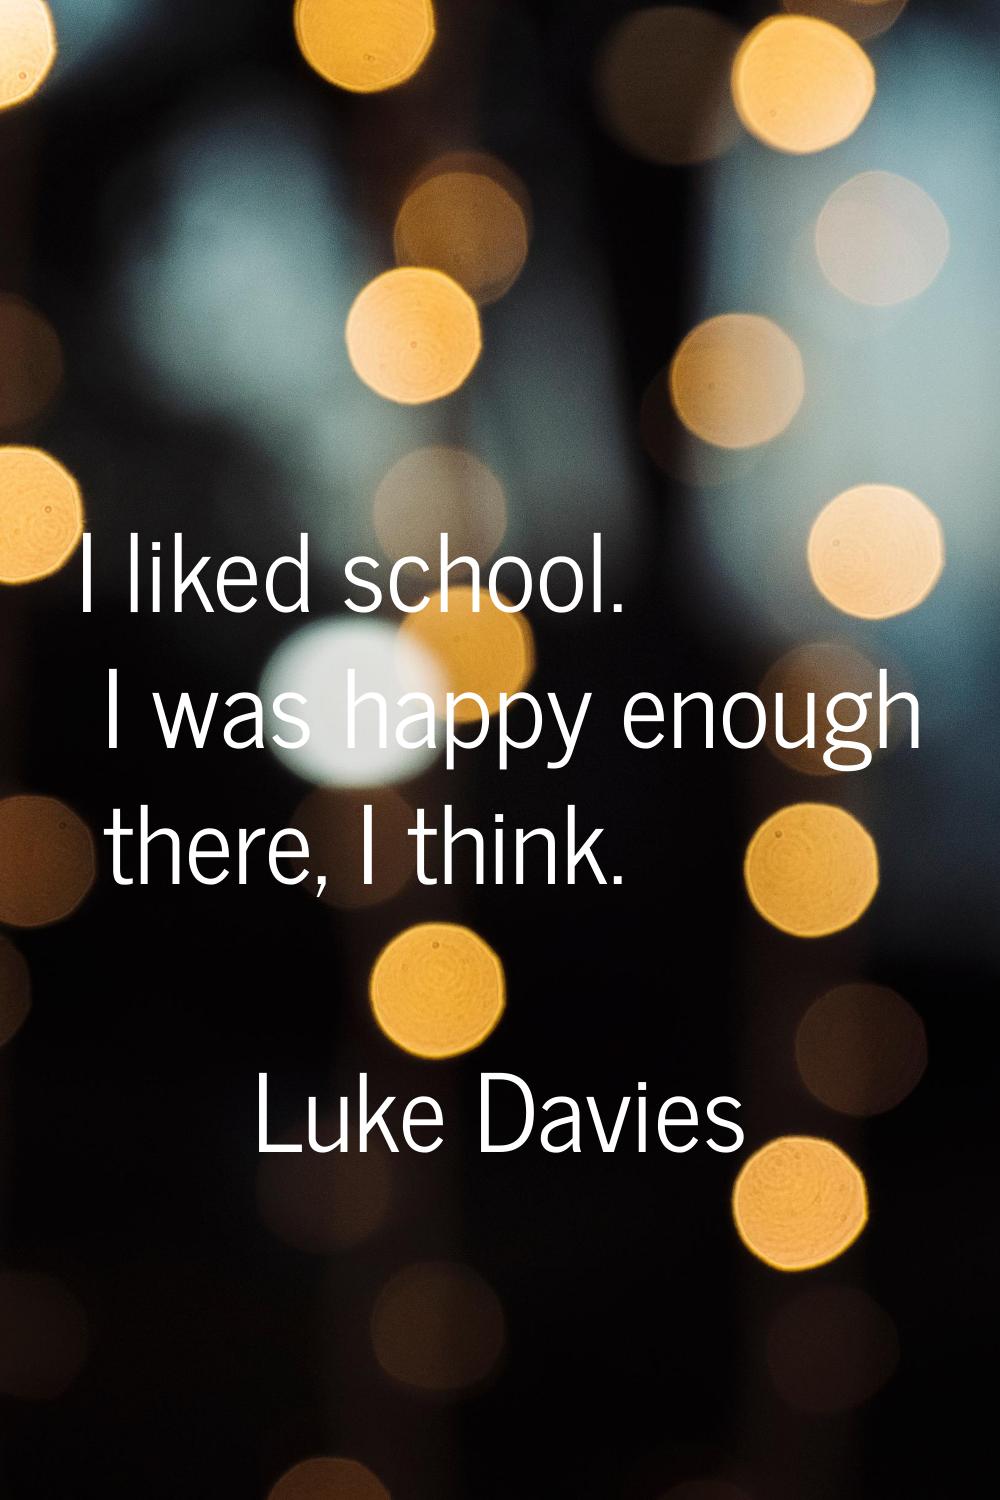 I liked school. I was happy enough there, I think.